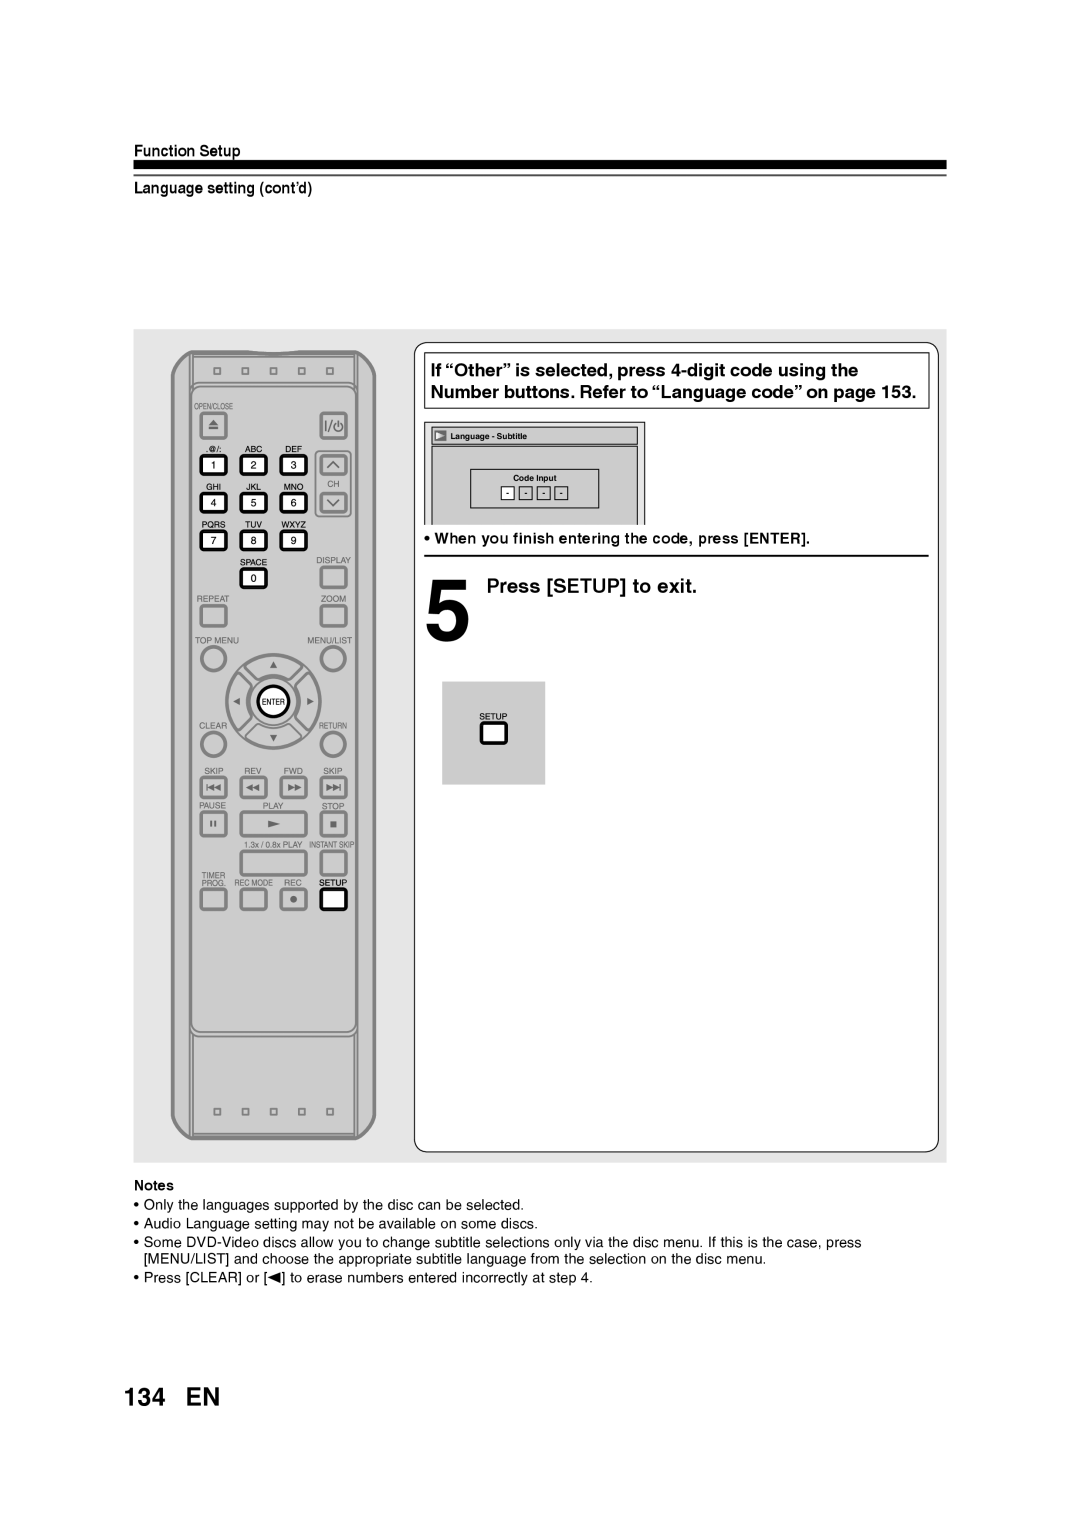 Toshiba D-RW2SU/D-RW2SC manual 134 EN, If “Other” is selected, press 4-digit code using the, Press SETUP to exit 